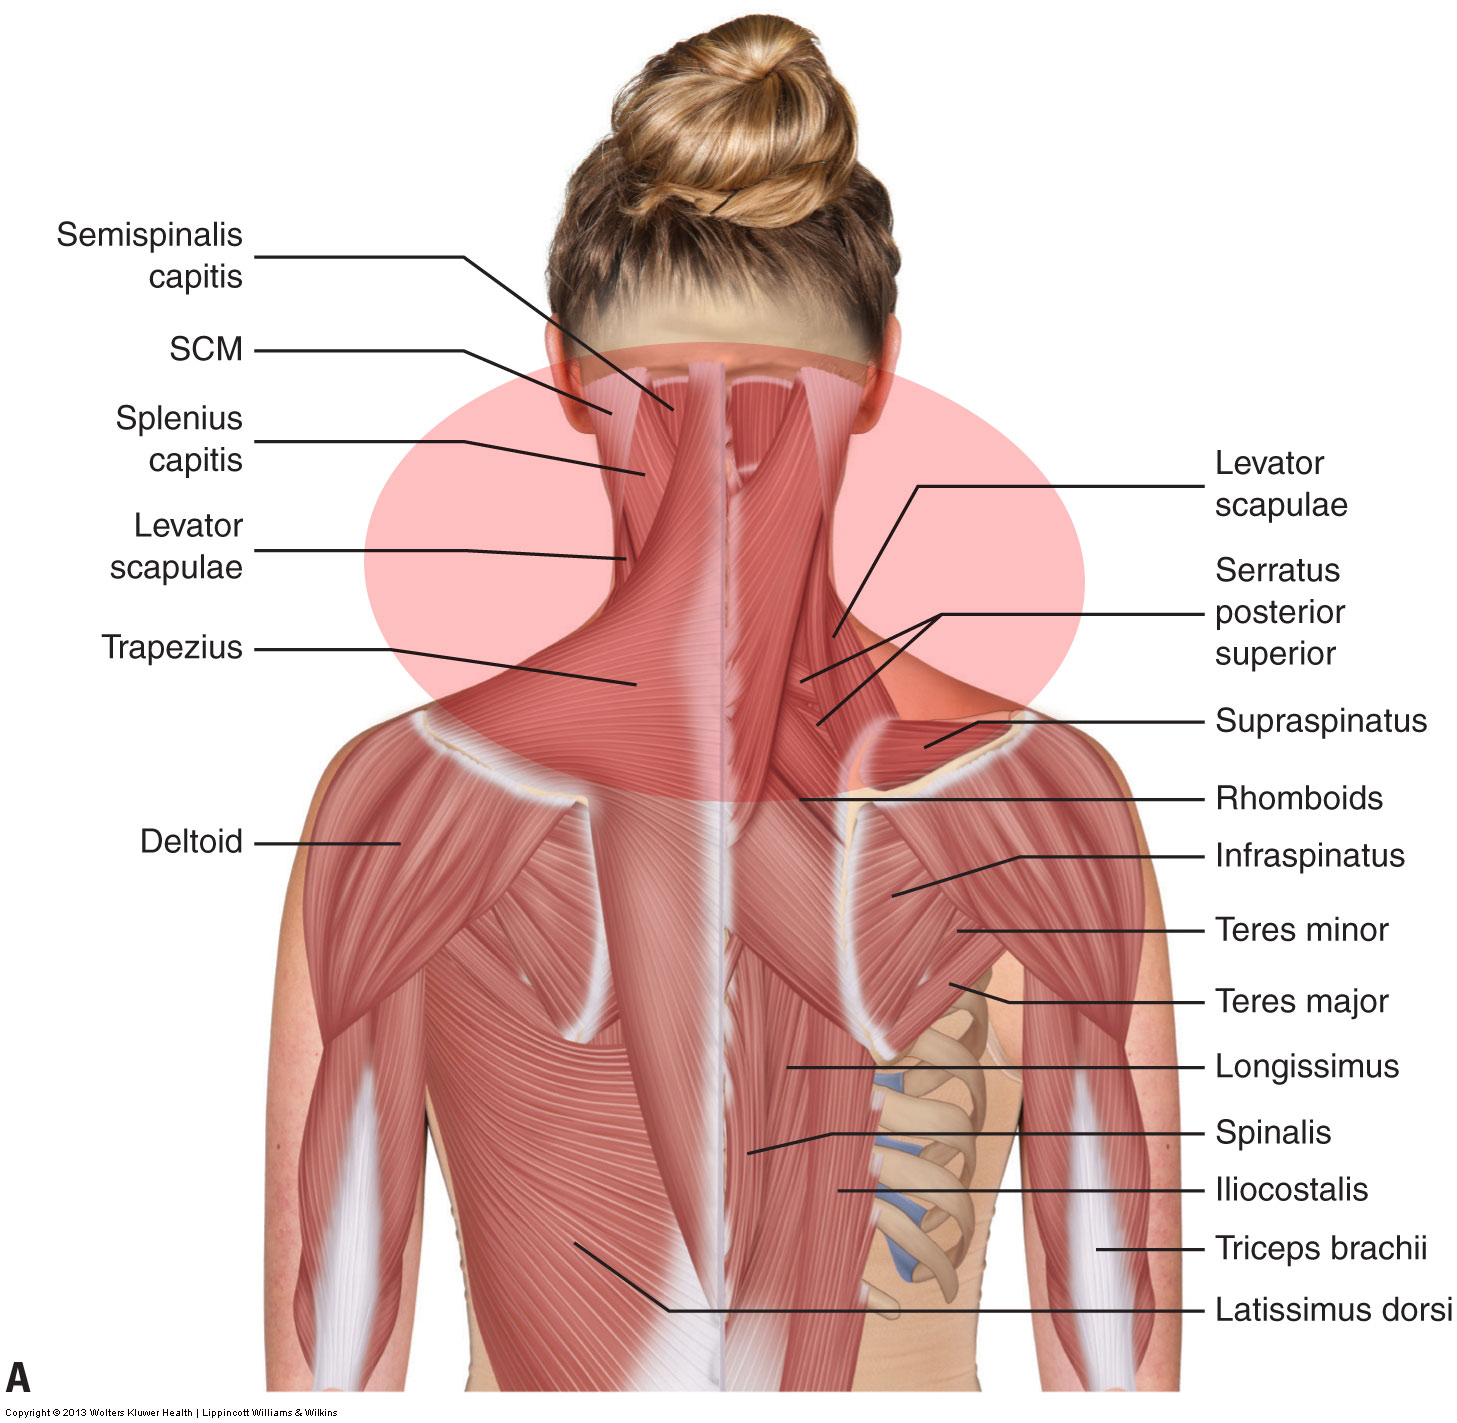 MultiBrief: Simplifying neck assessment for massage therapists